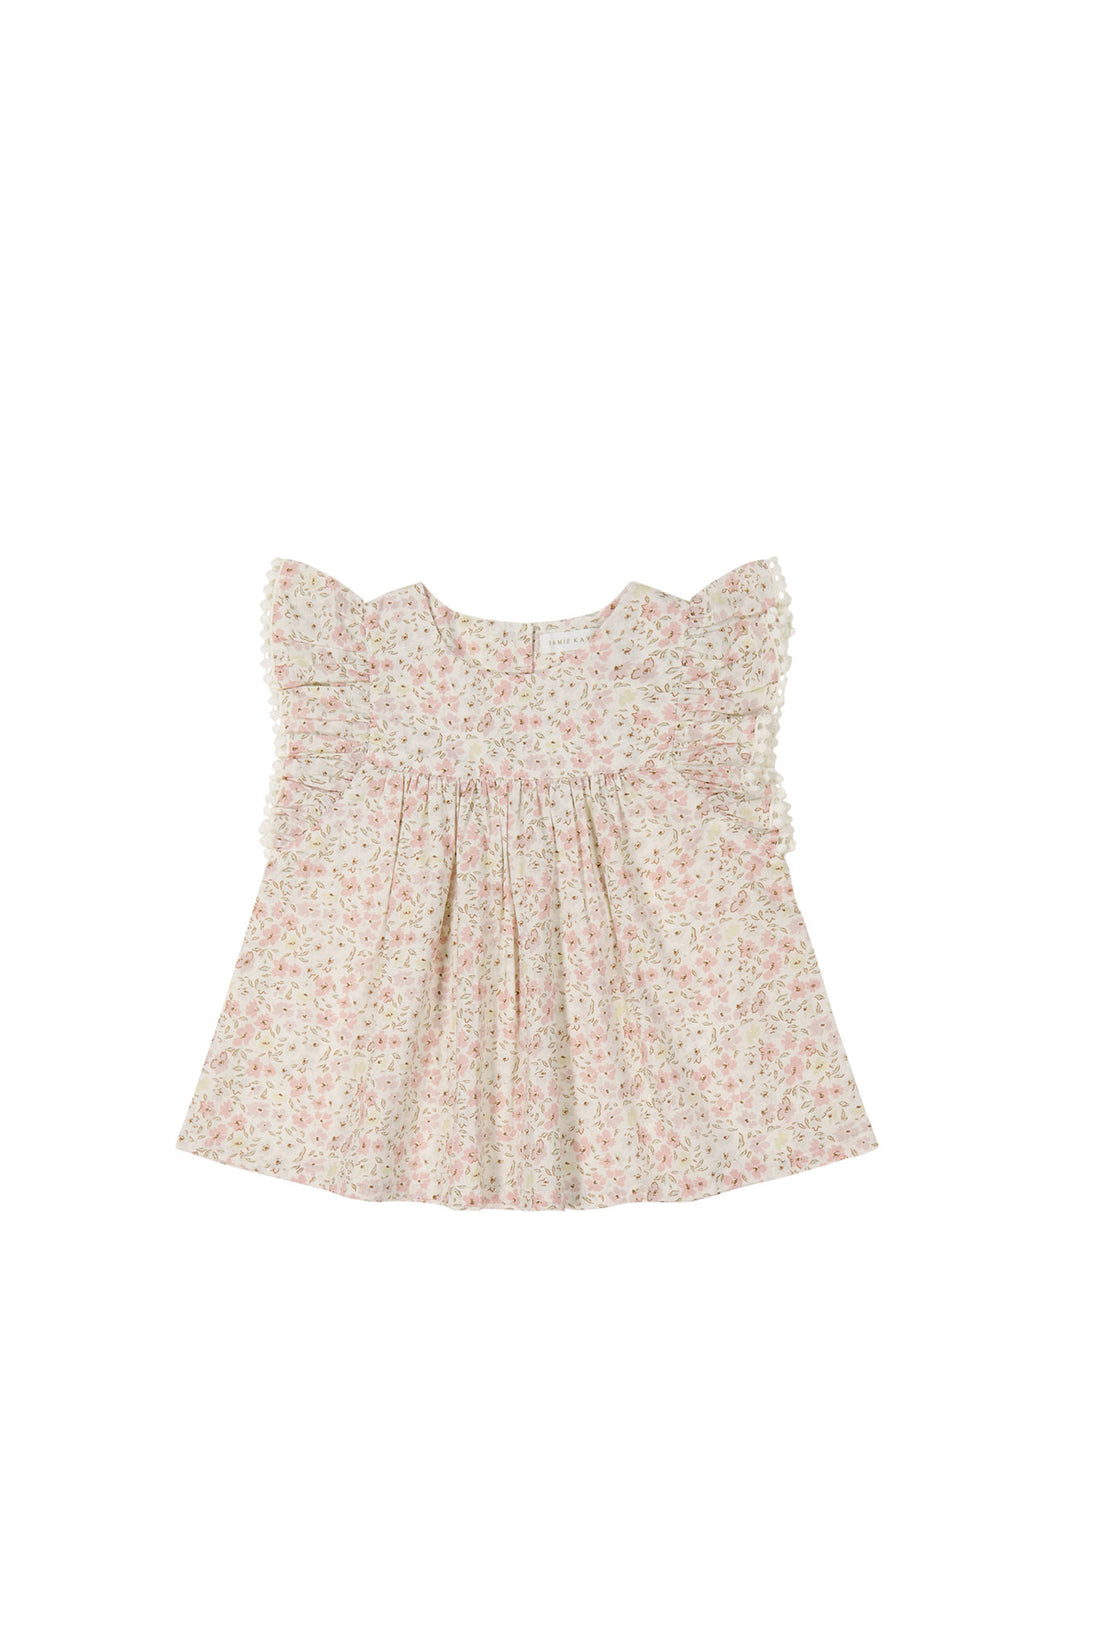 Organic Cotton Eleanor Top - Fifi Floral Childrens Top from Jamie Kay NZ